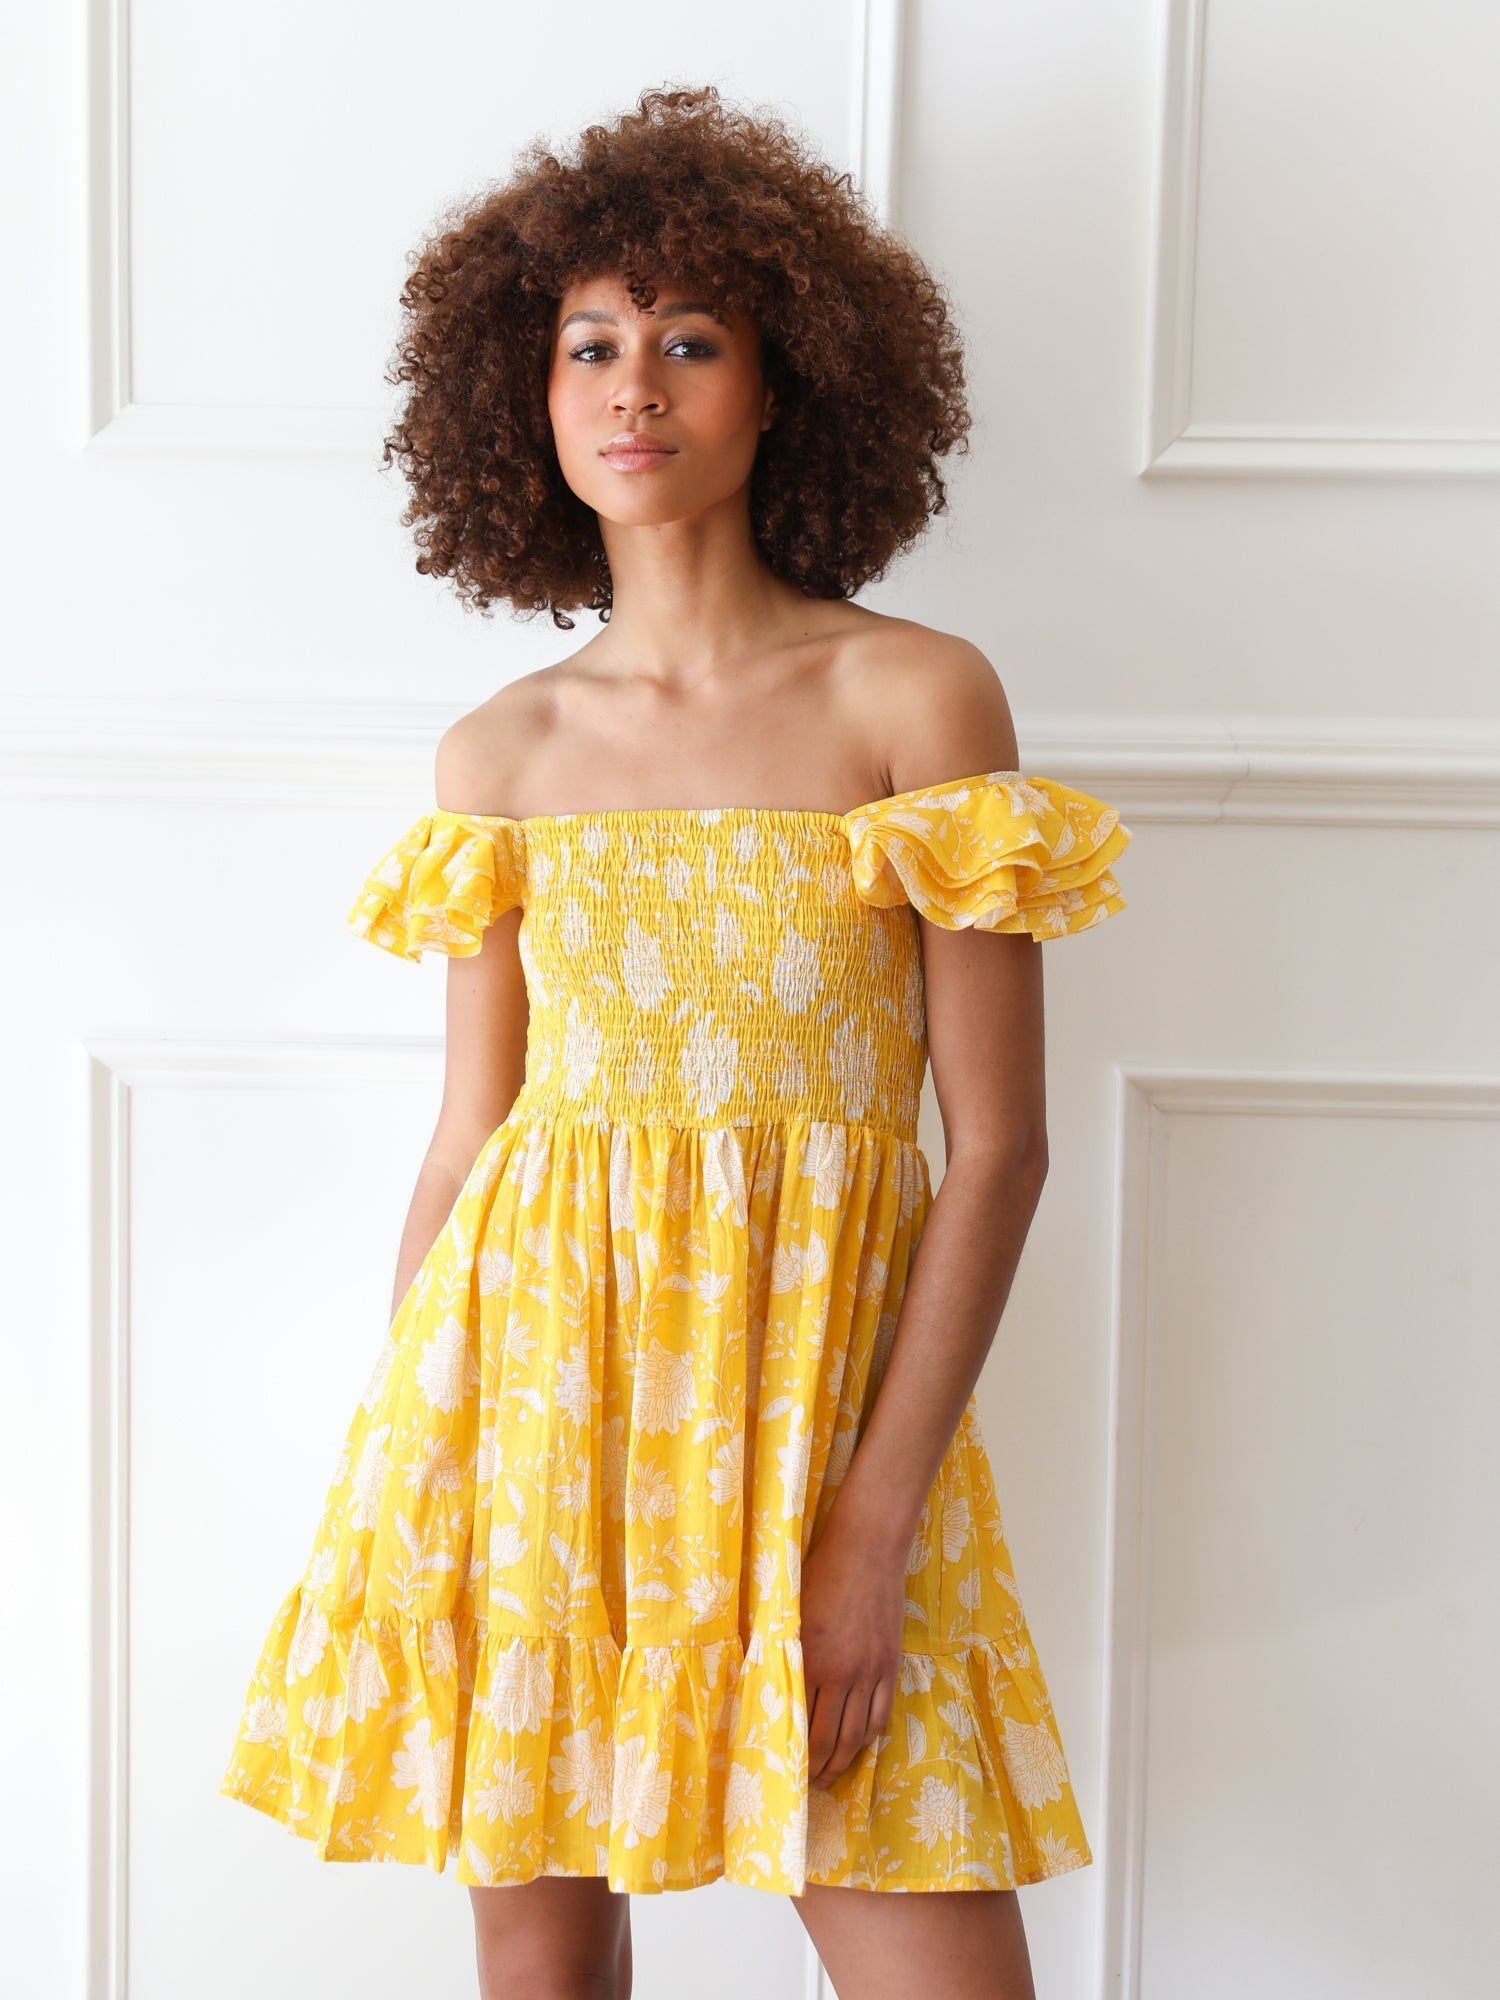 MILLE Clothing Bea Dress in Yellow Zinnia